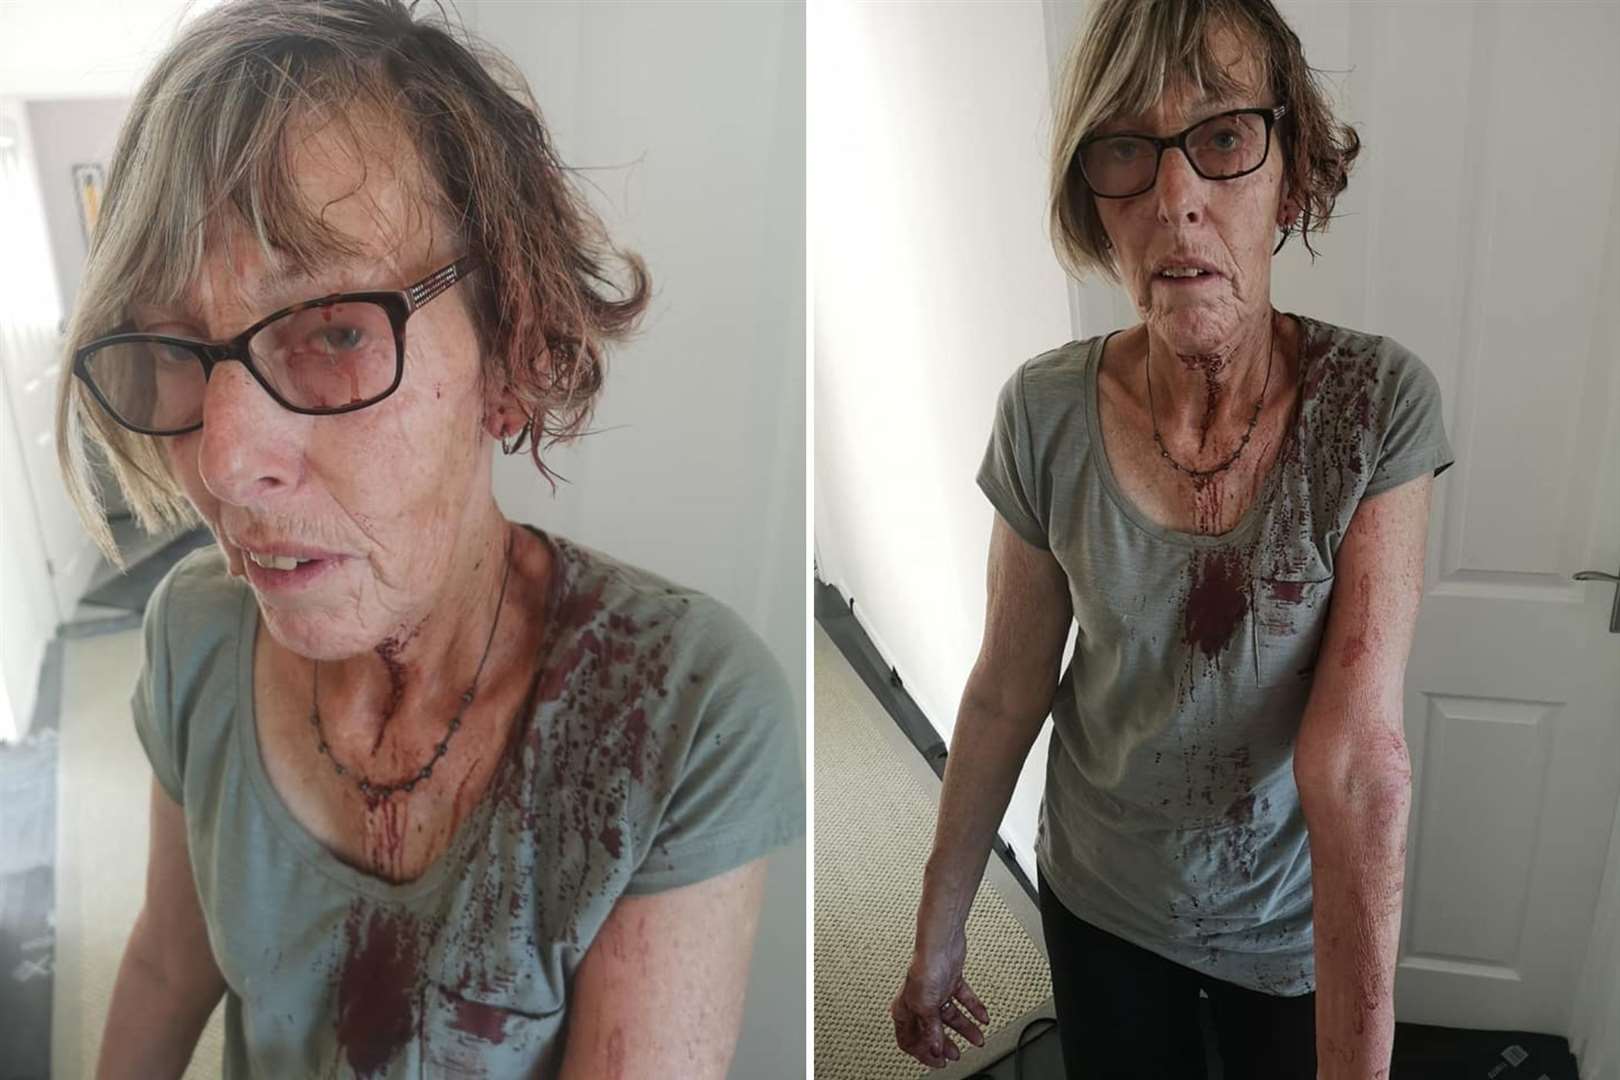 Brenda Thrumble was left soaked in blood after being attacked by a vicious seagull in St Peters